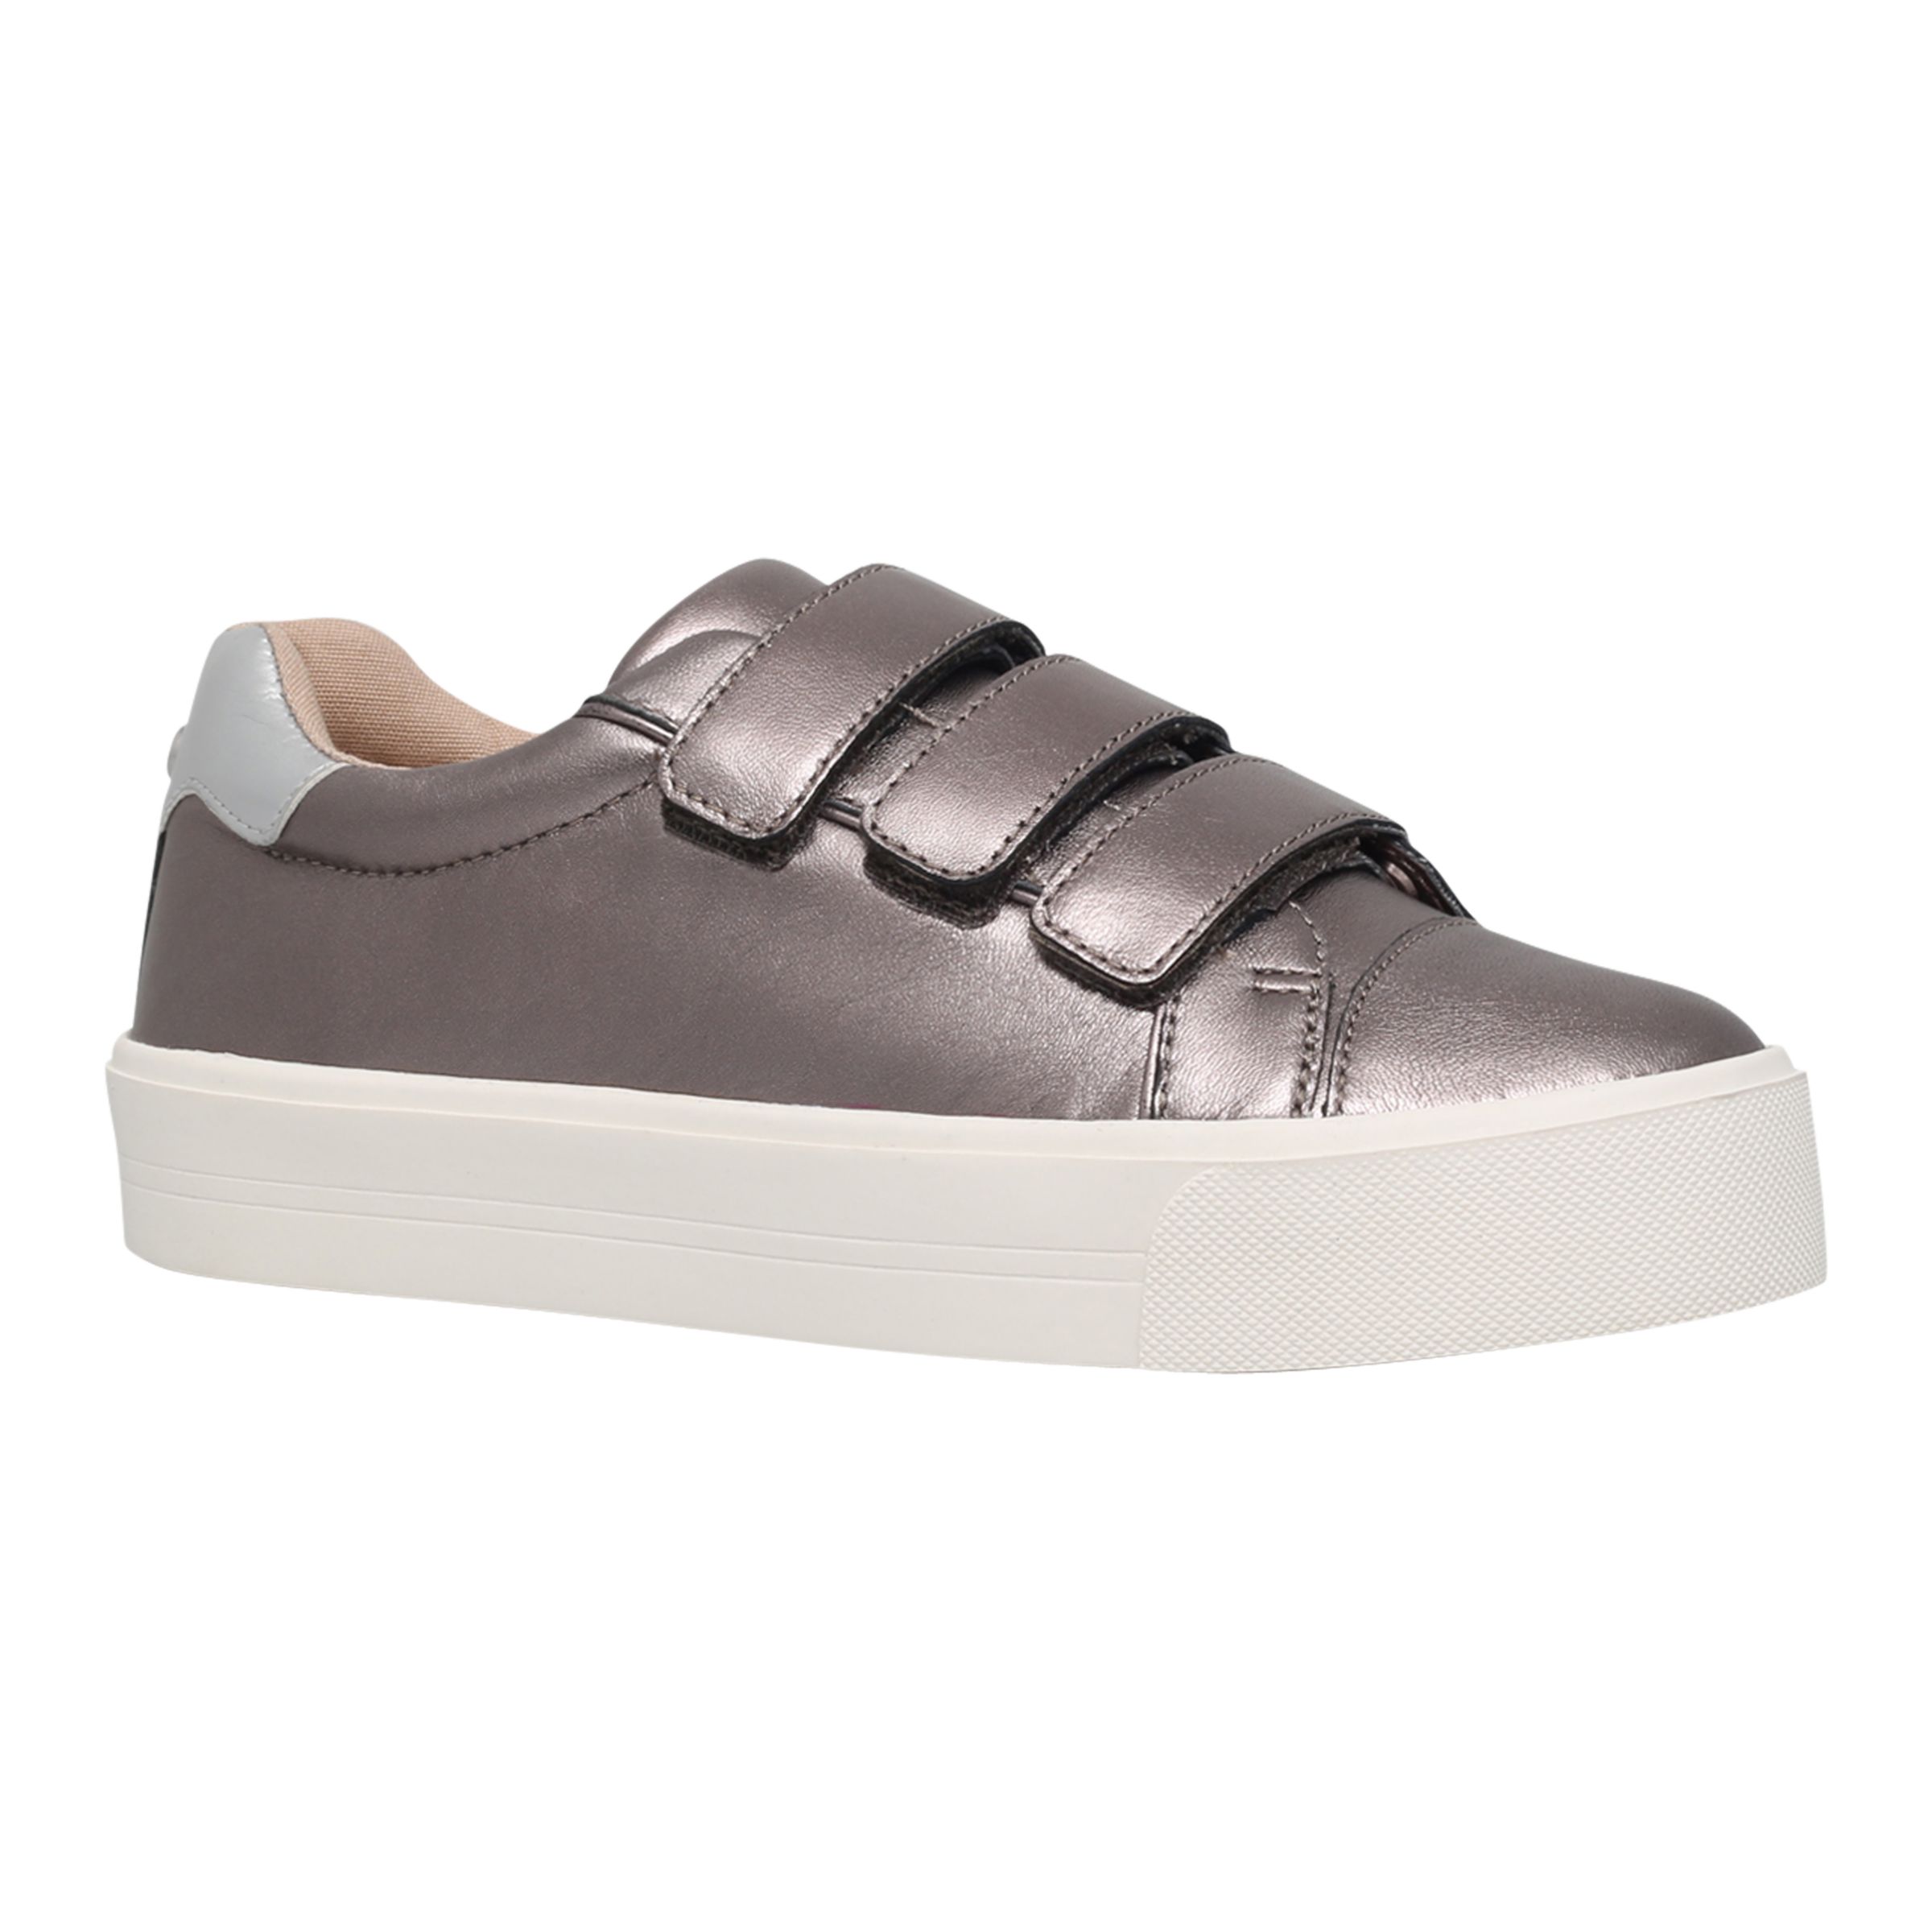 Carvela Lily Leather Sports Shoes at John Lewis & Partners